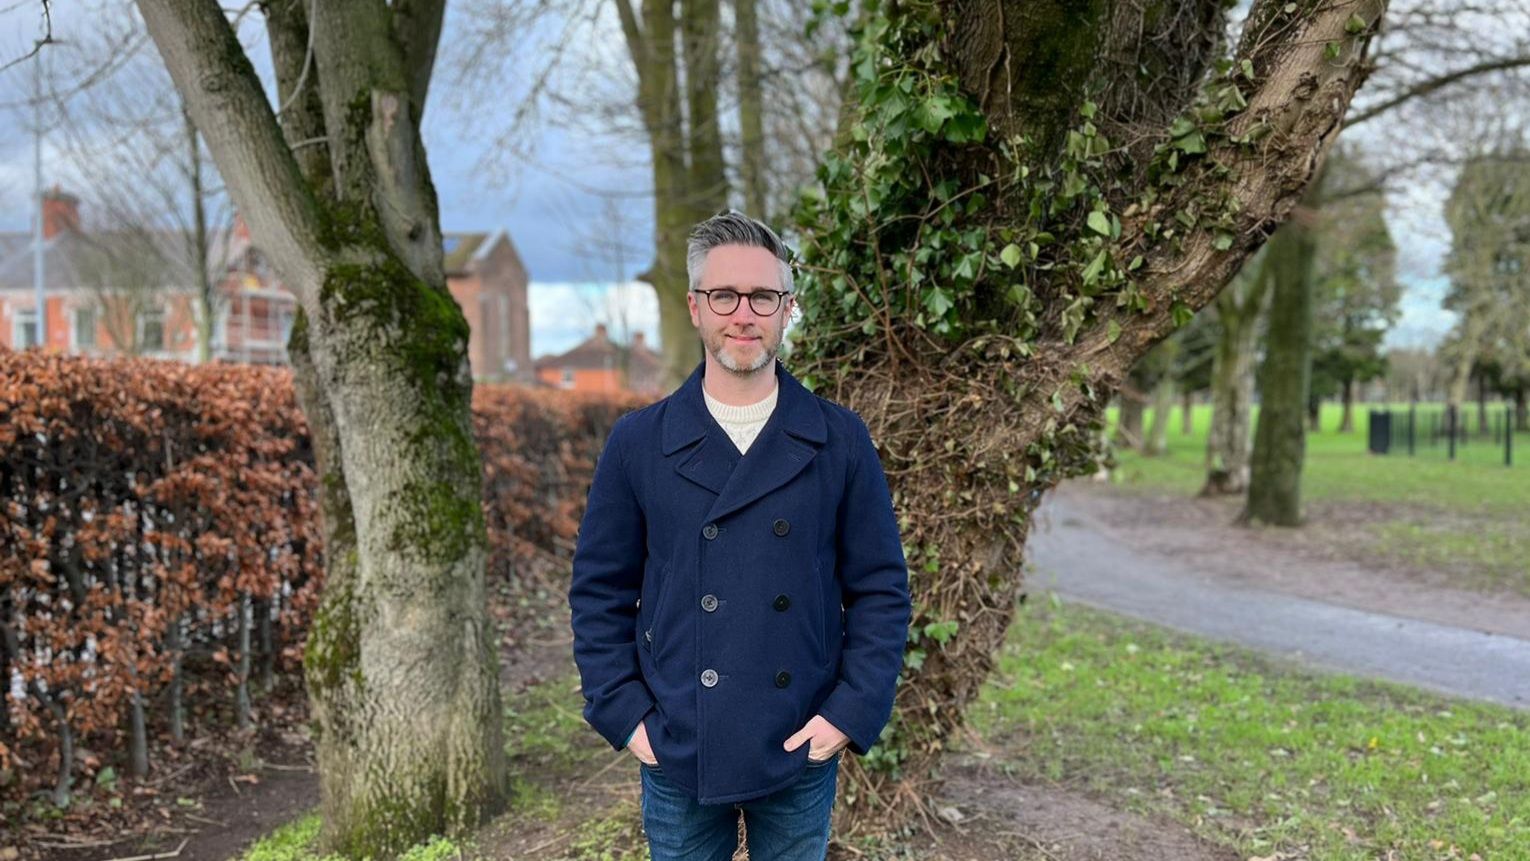 FREE TREES: Cllr McKeown is encouraging people to come along to Ormeau Park on Saturday and pick up a free tree to take home and plant